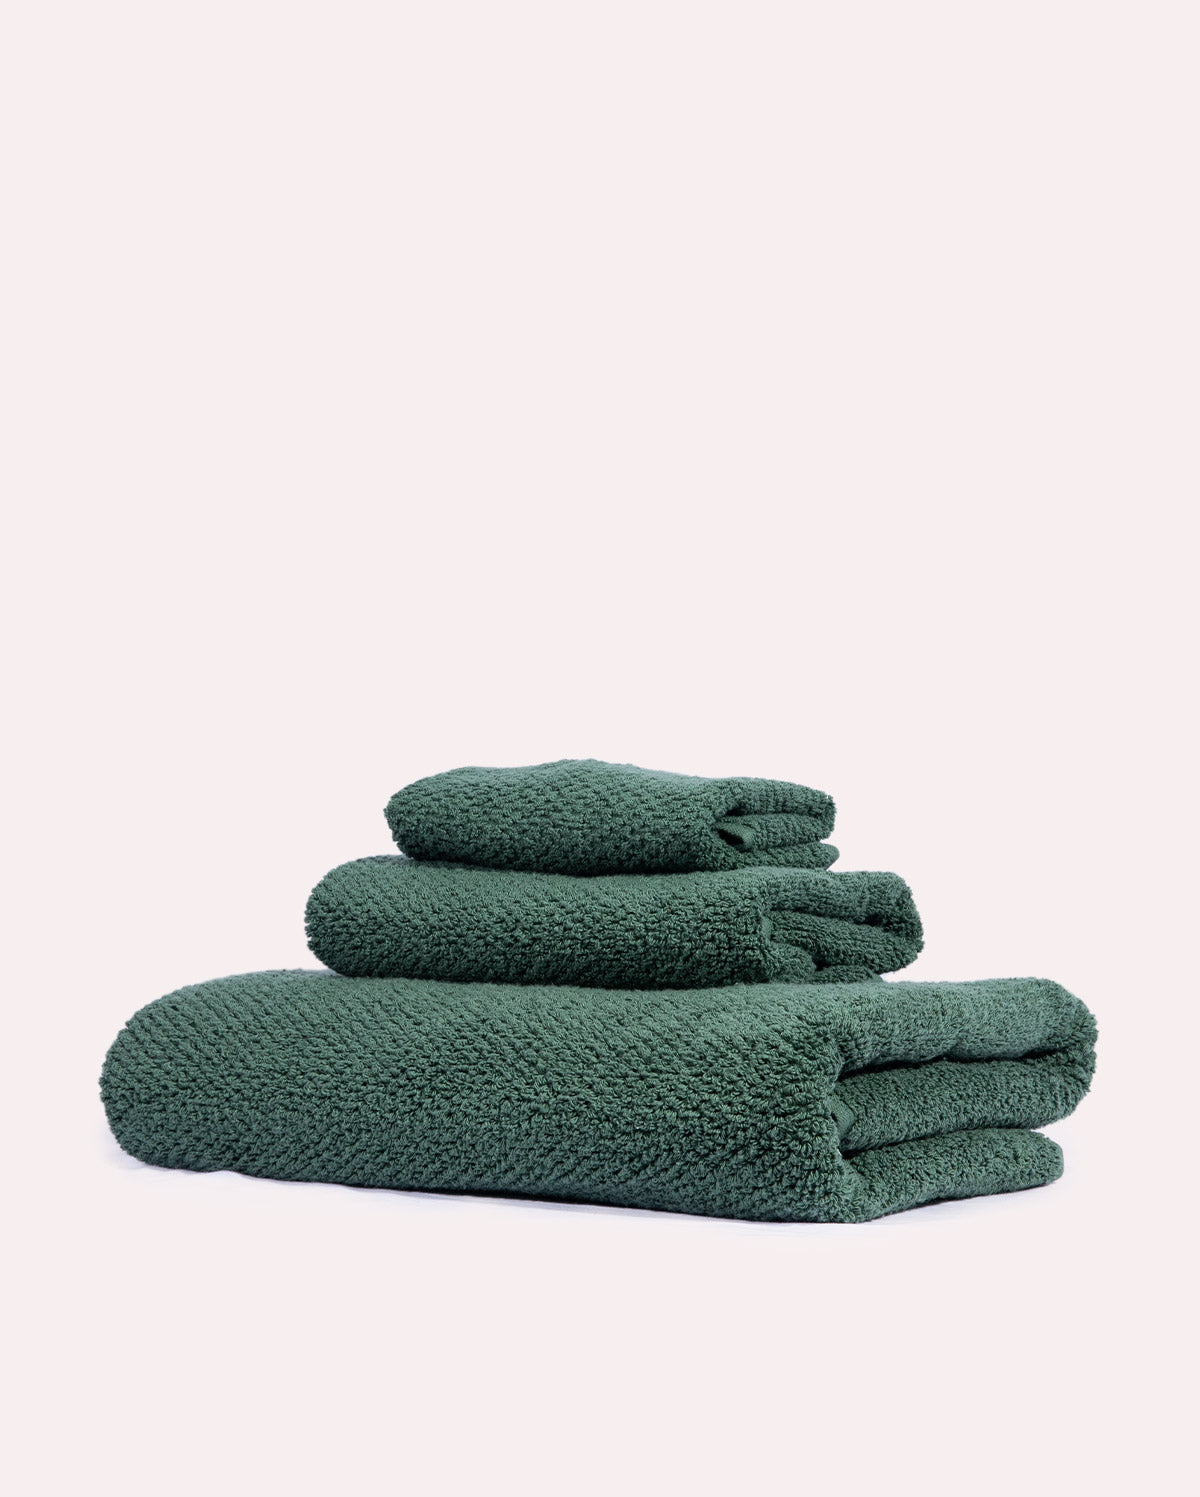 Willow Cotton Towel Set - Green (3 Towels)